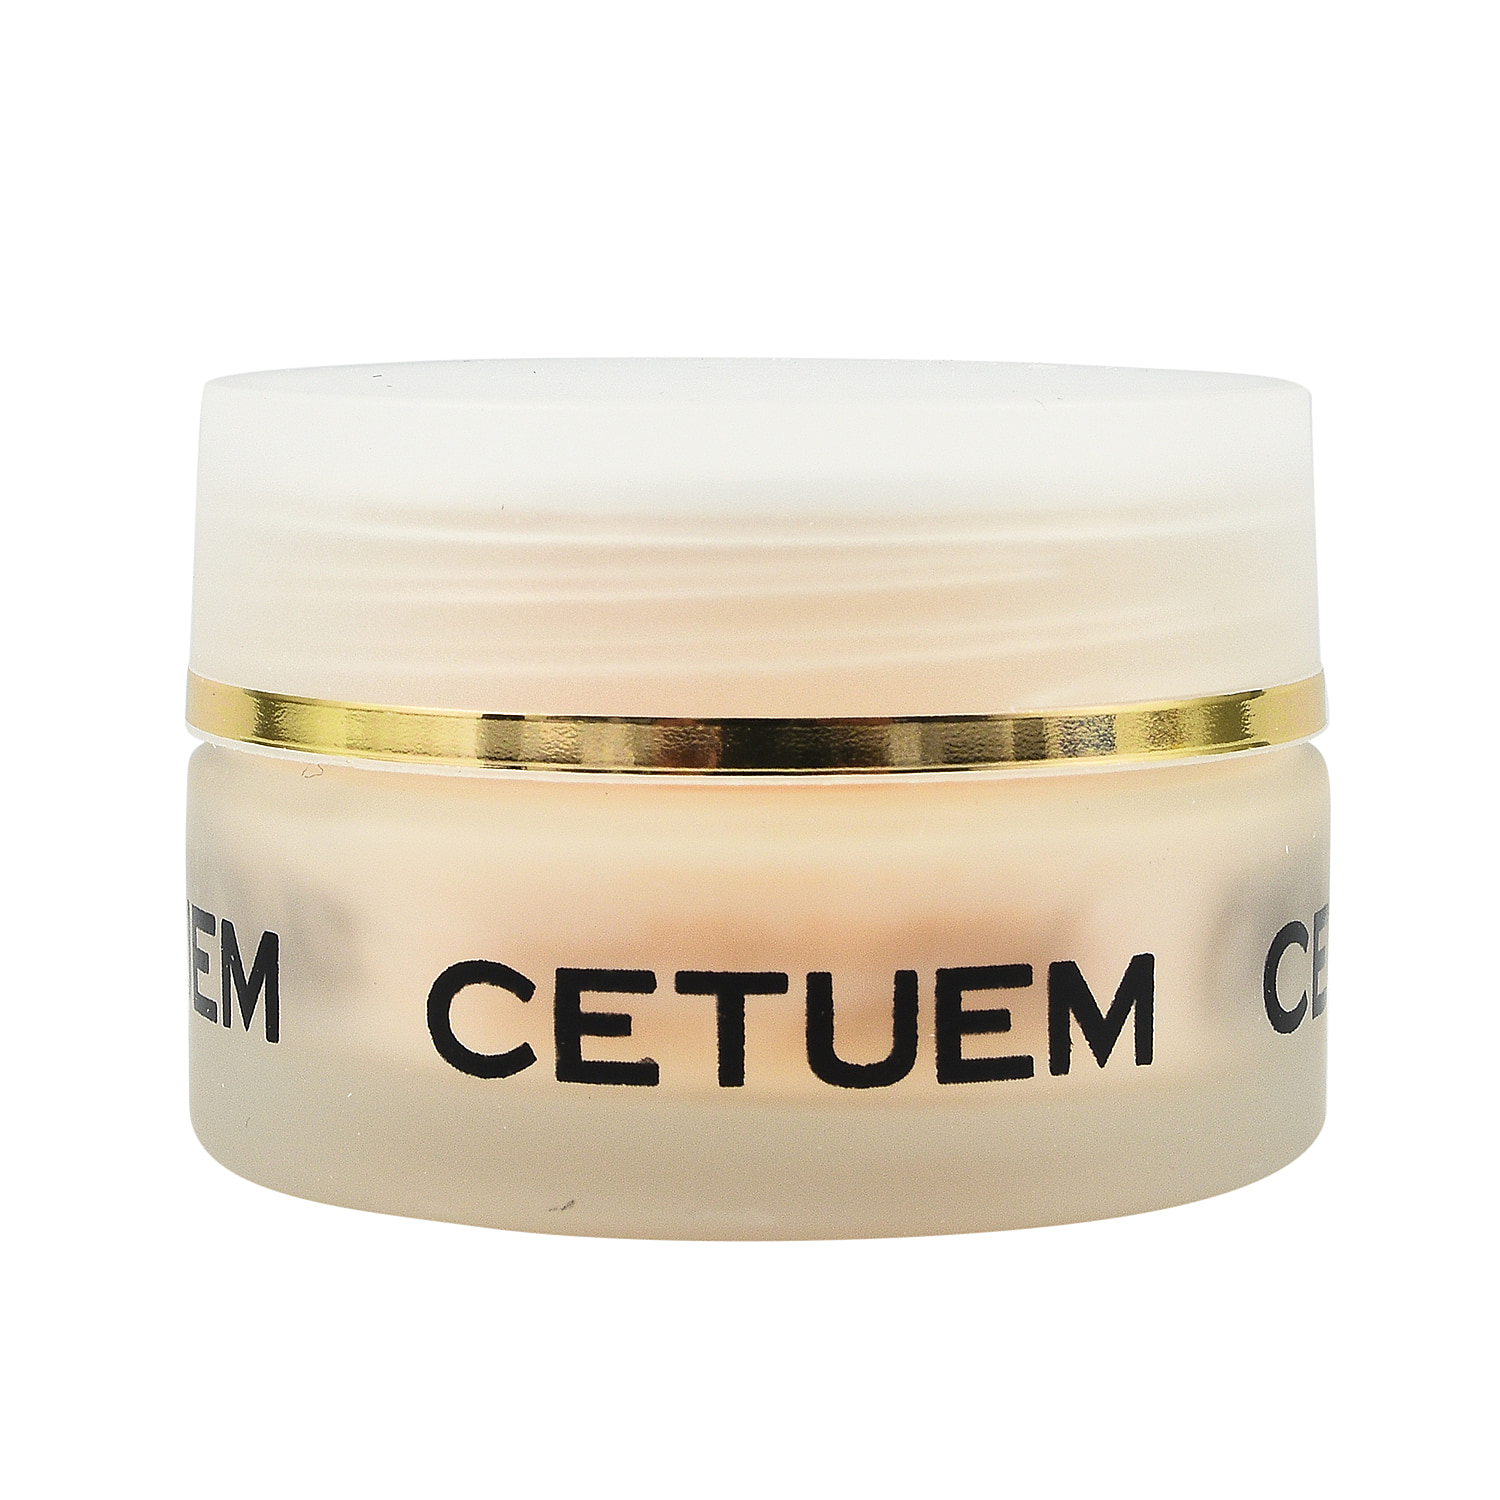 Cetuem SCR Gold Lip Allure with Hyaluronic Acid, Vitamin E, Cocoa Butter and Pomegranate for Deep Hydration and Protection of lips